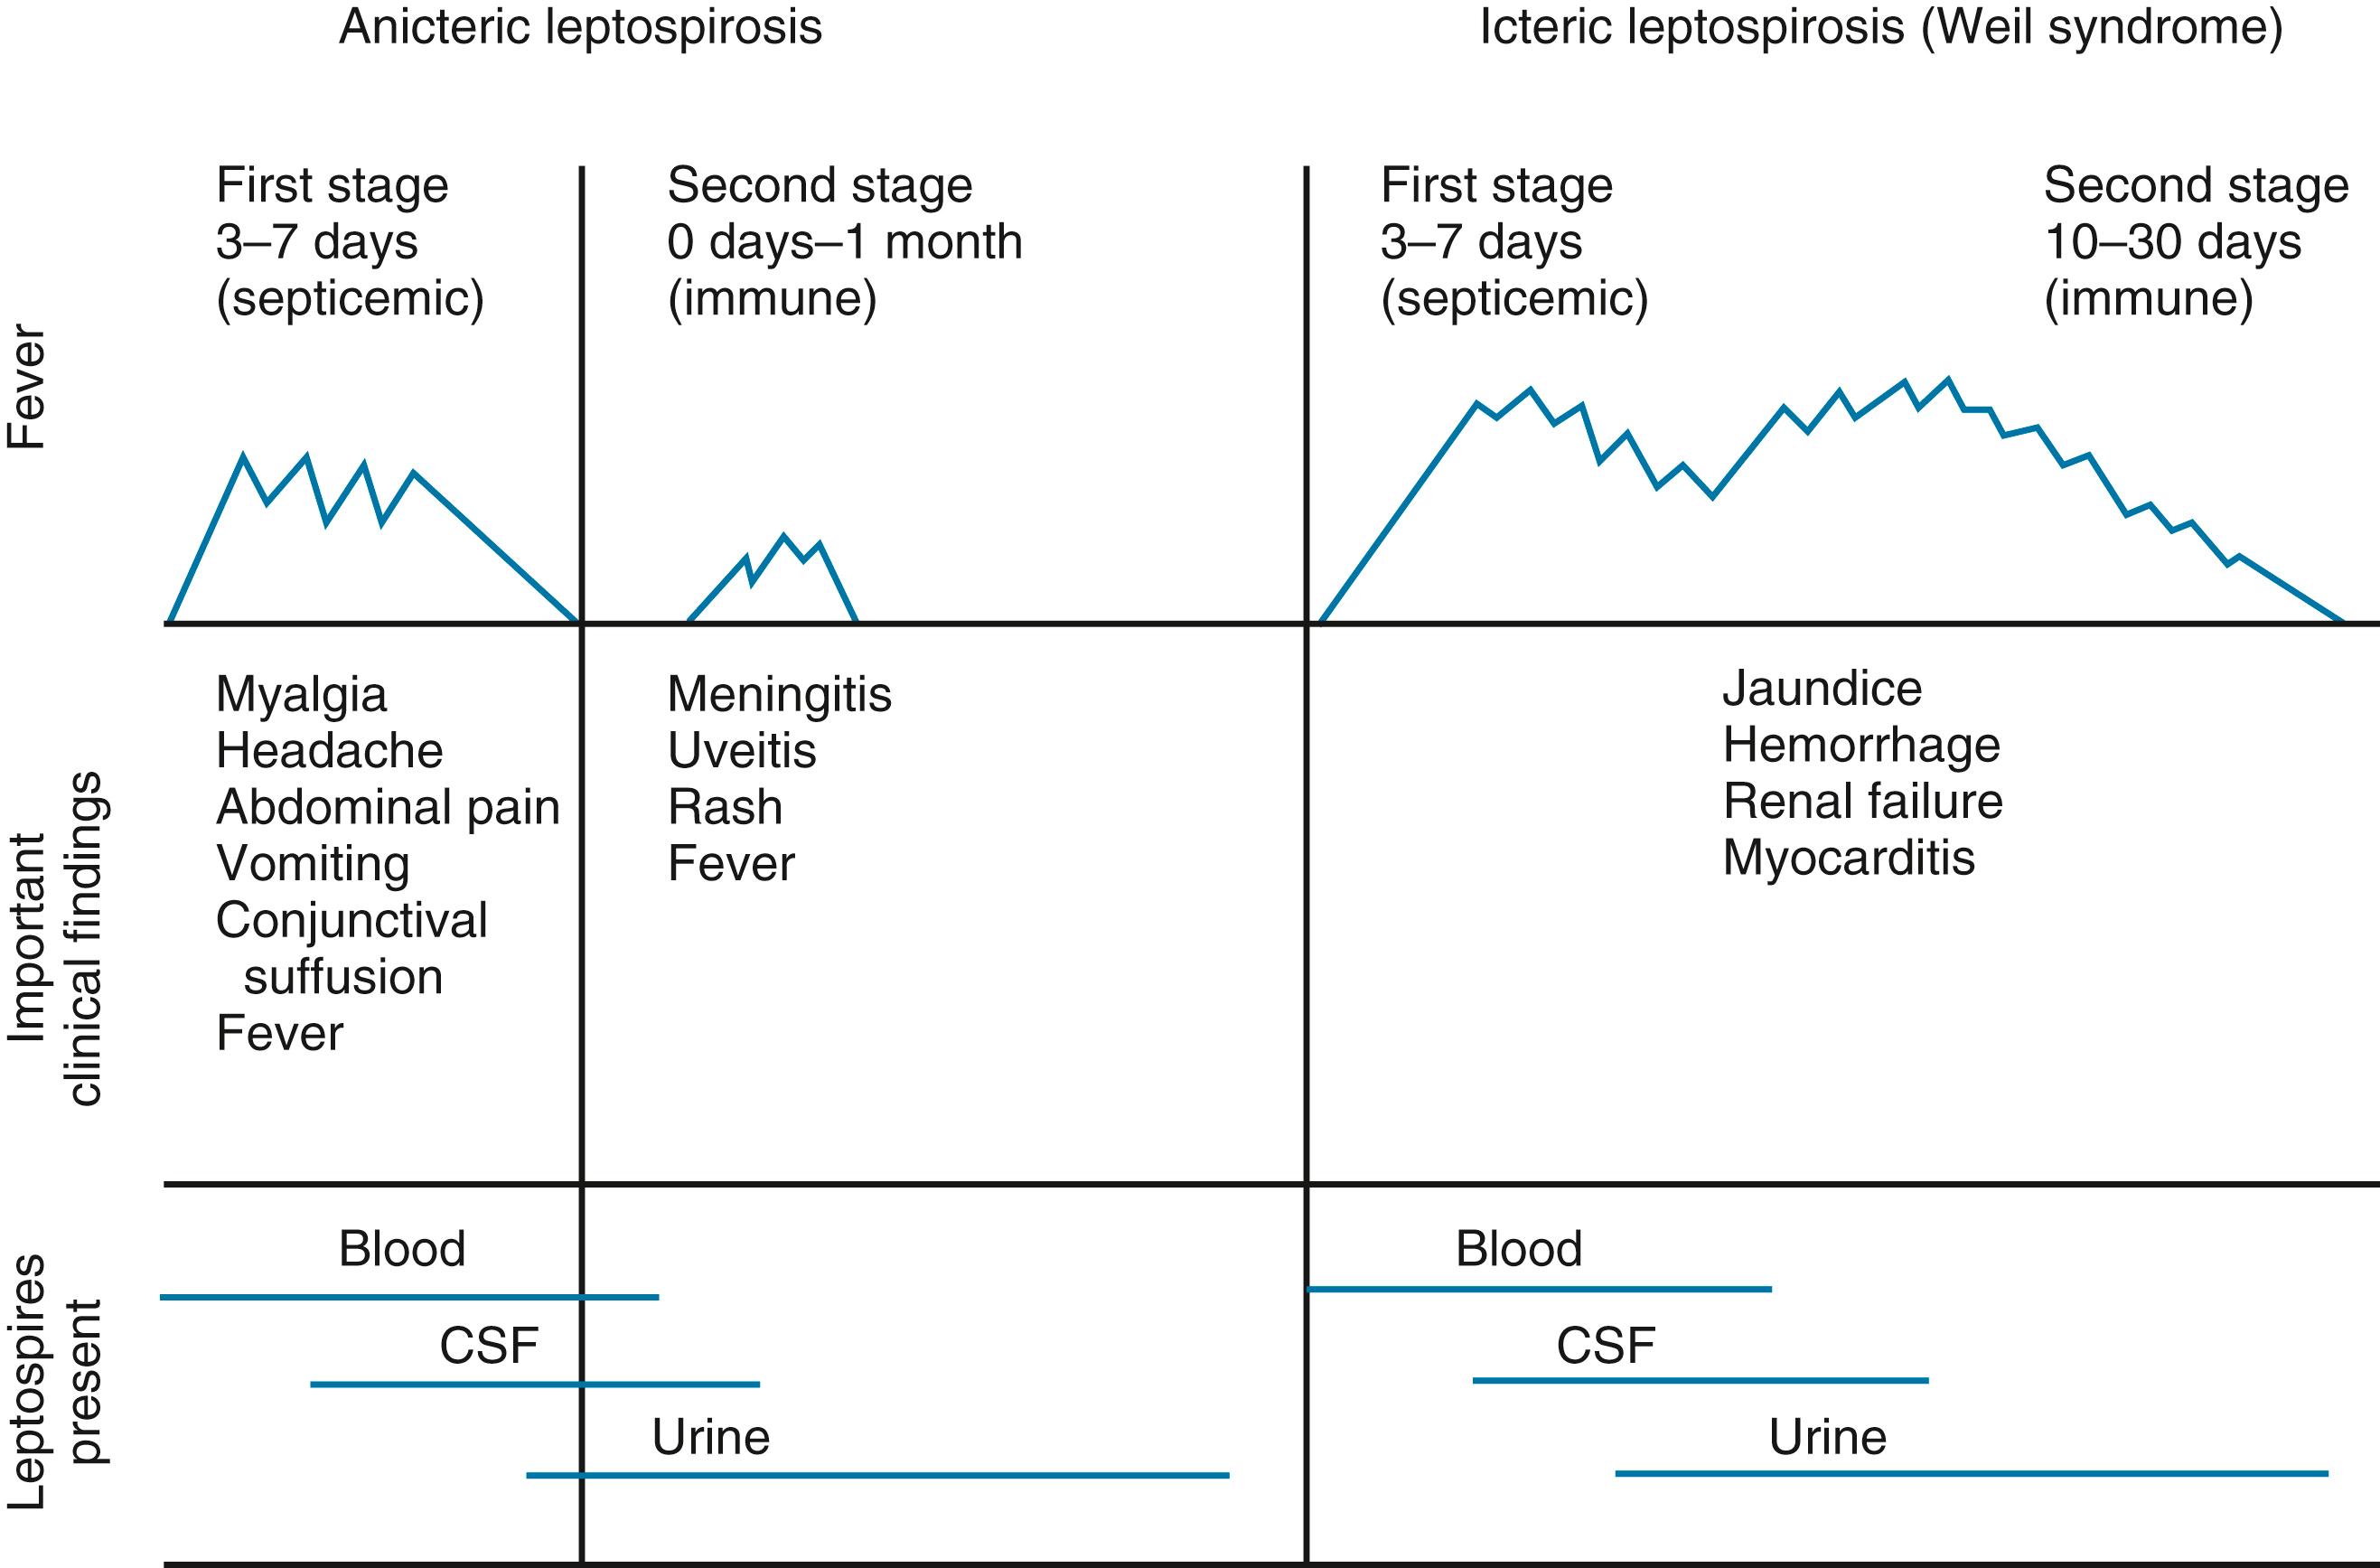 FIGURE 184.1, Stages of anicteric and icteric leptospirosis. Correlation between clinical findings and the presence of leptospires in body fluids. CSF, cerebrospinal fluid.